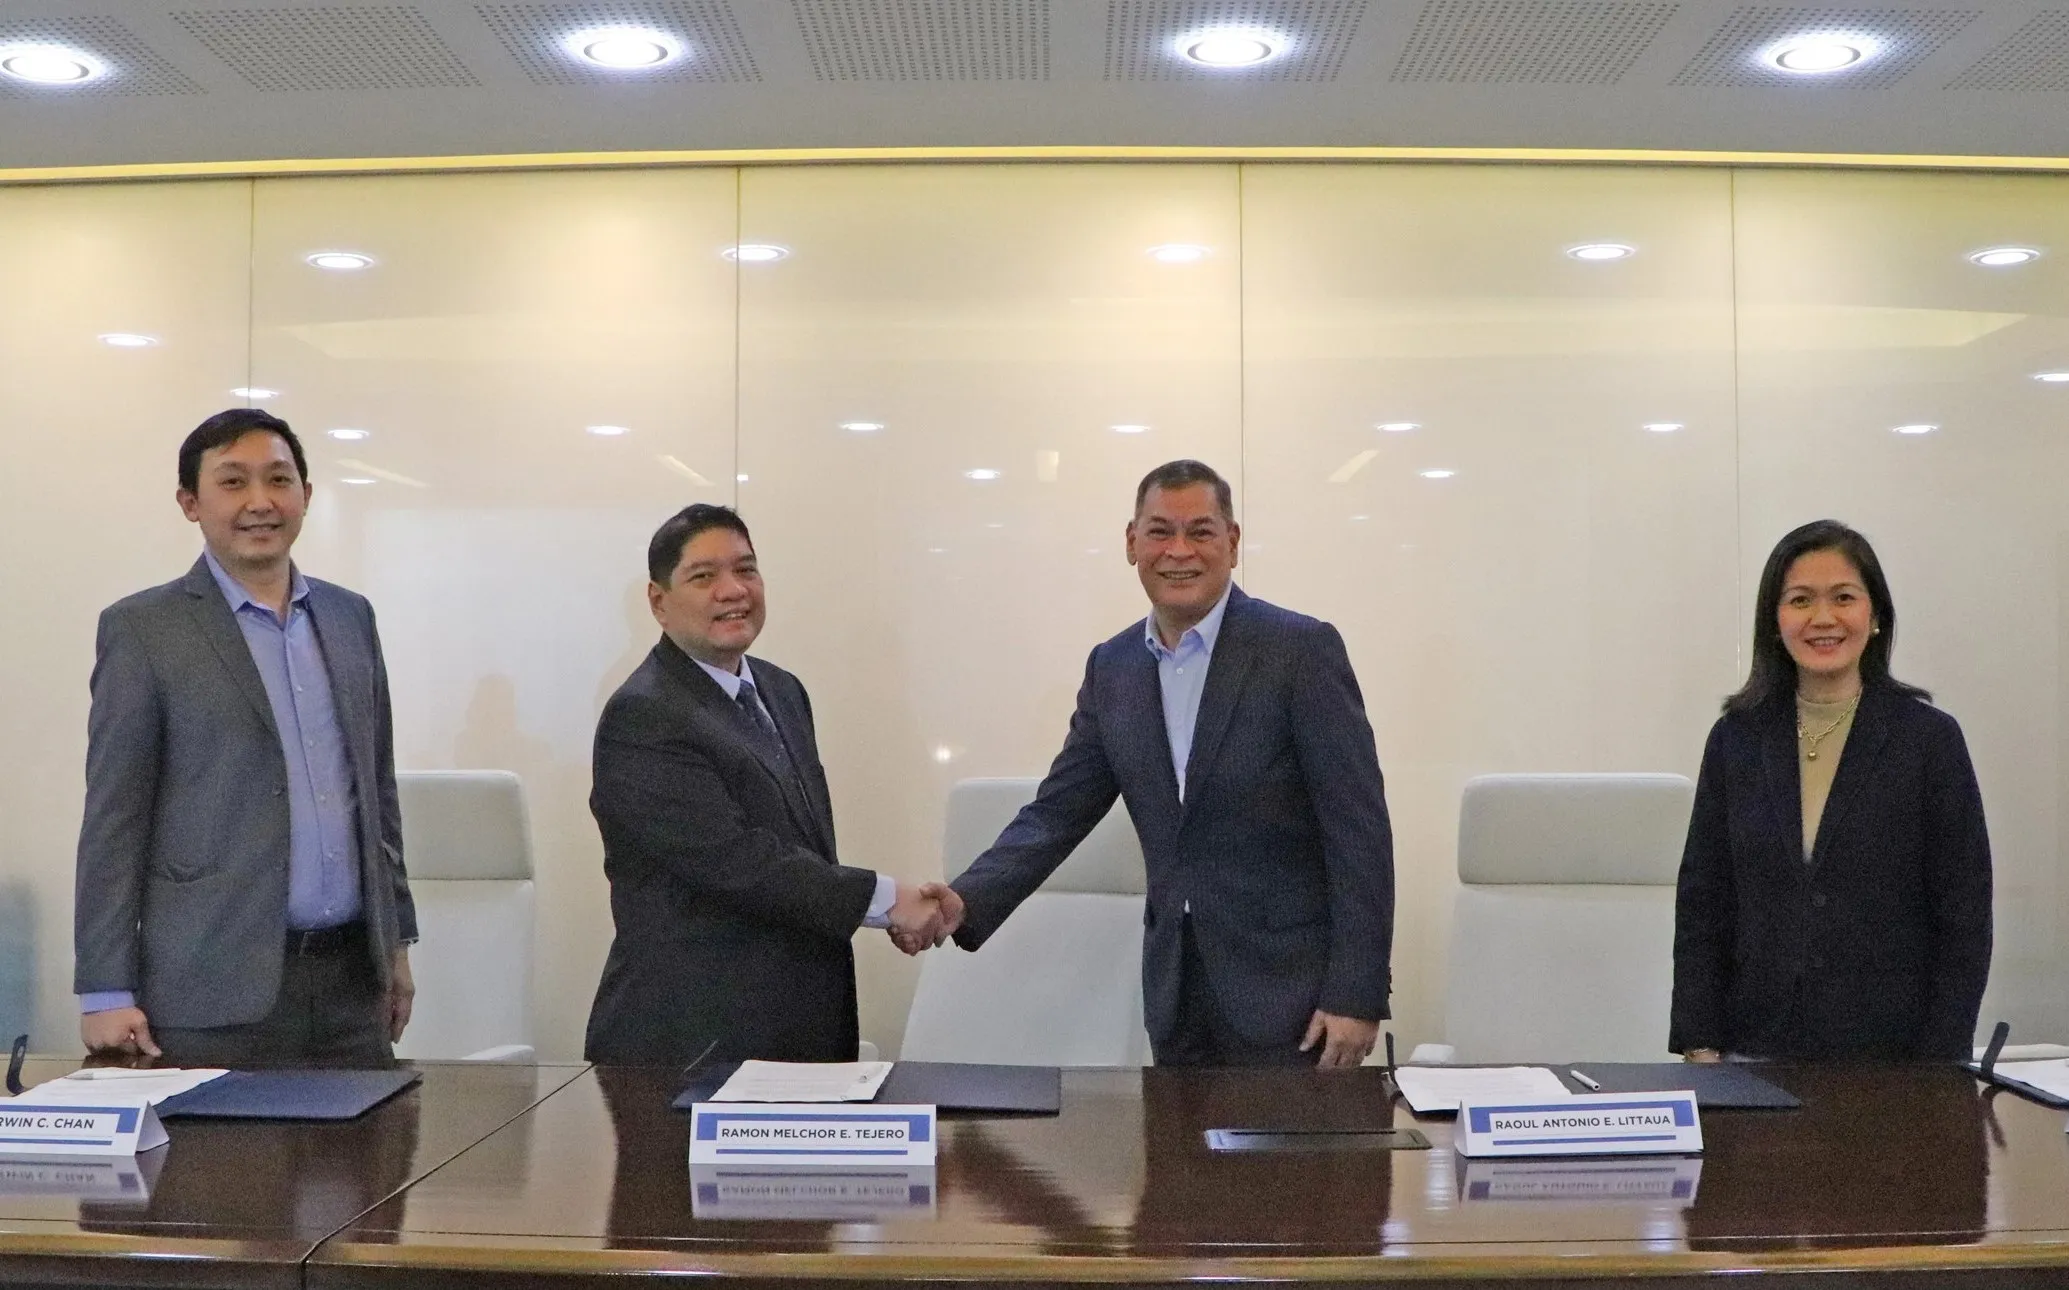 inlife-partners-with-cfsi-to-service-citi-customers